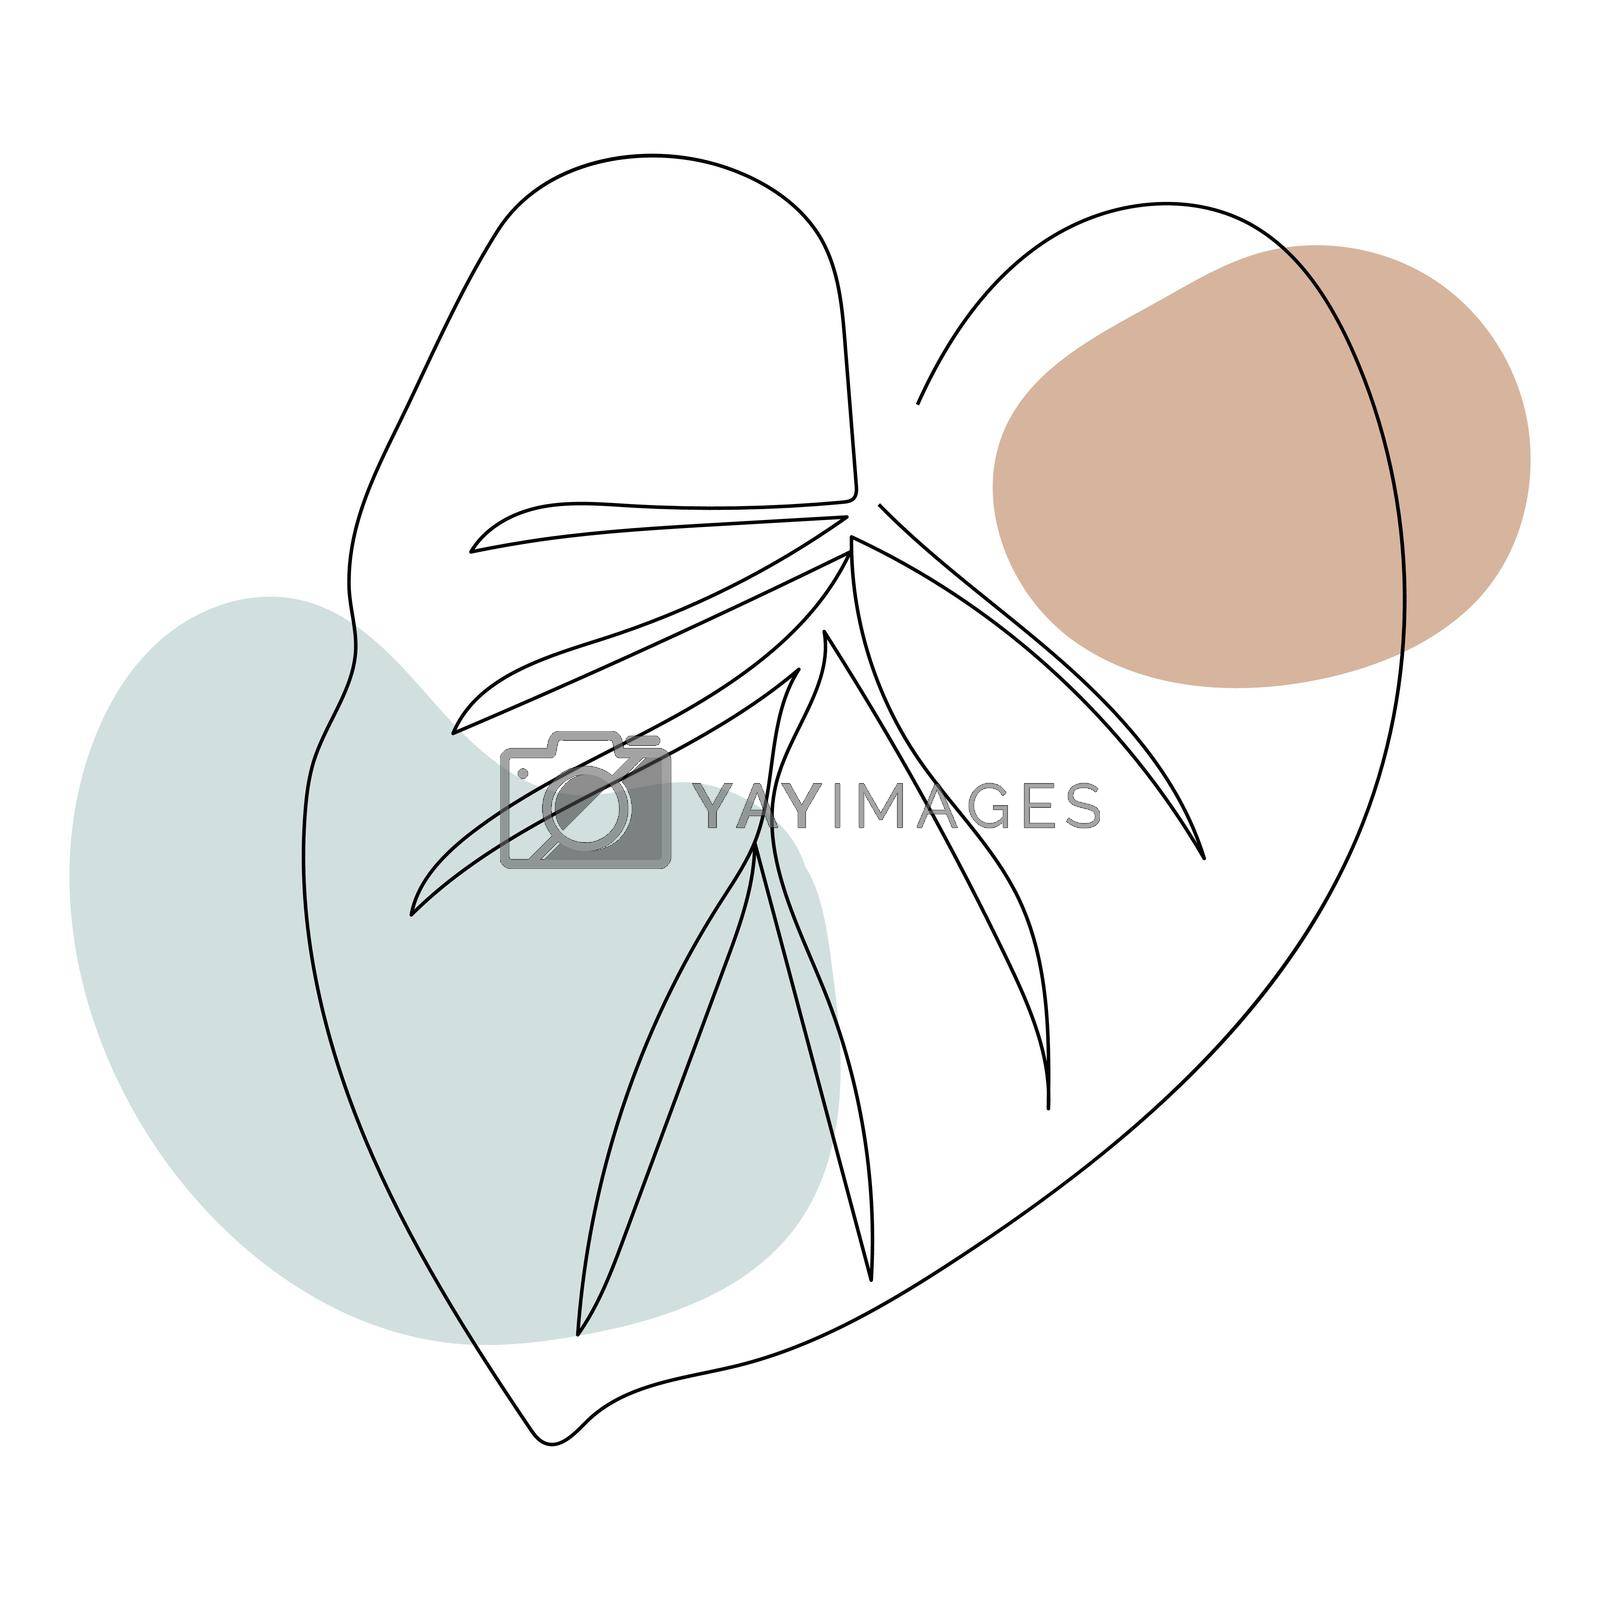 Royalty free image of Plant leaves line art. Contour drawing. Minimalism art. by doraclub